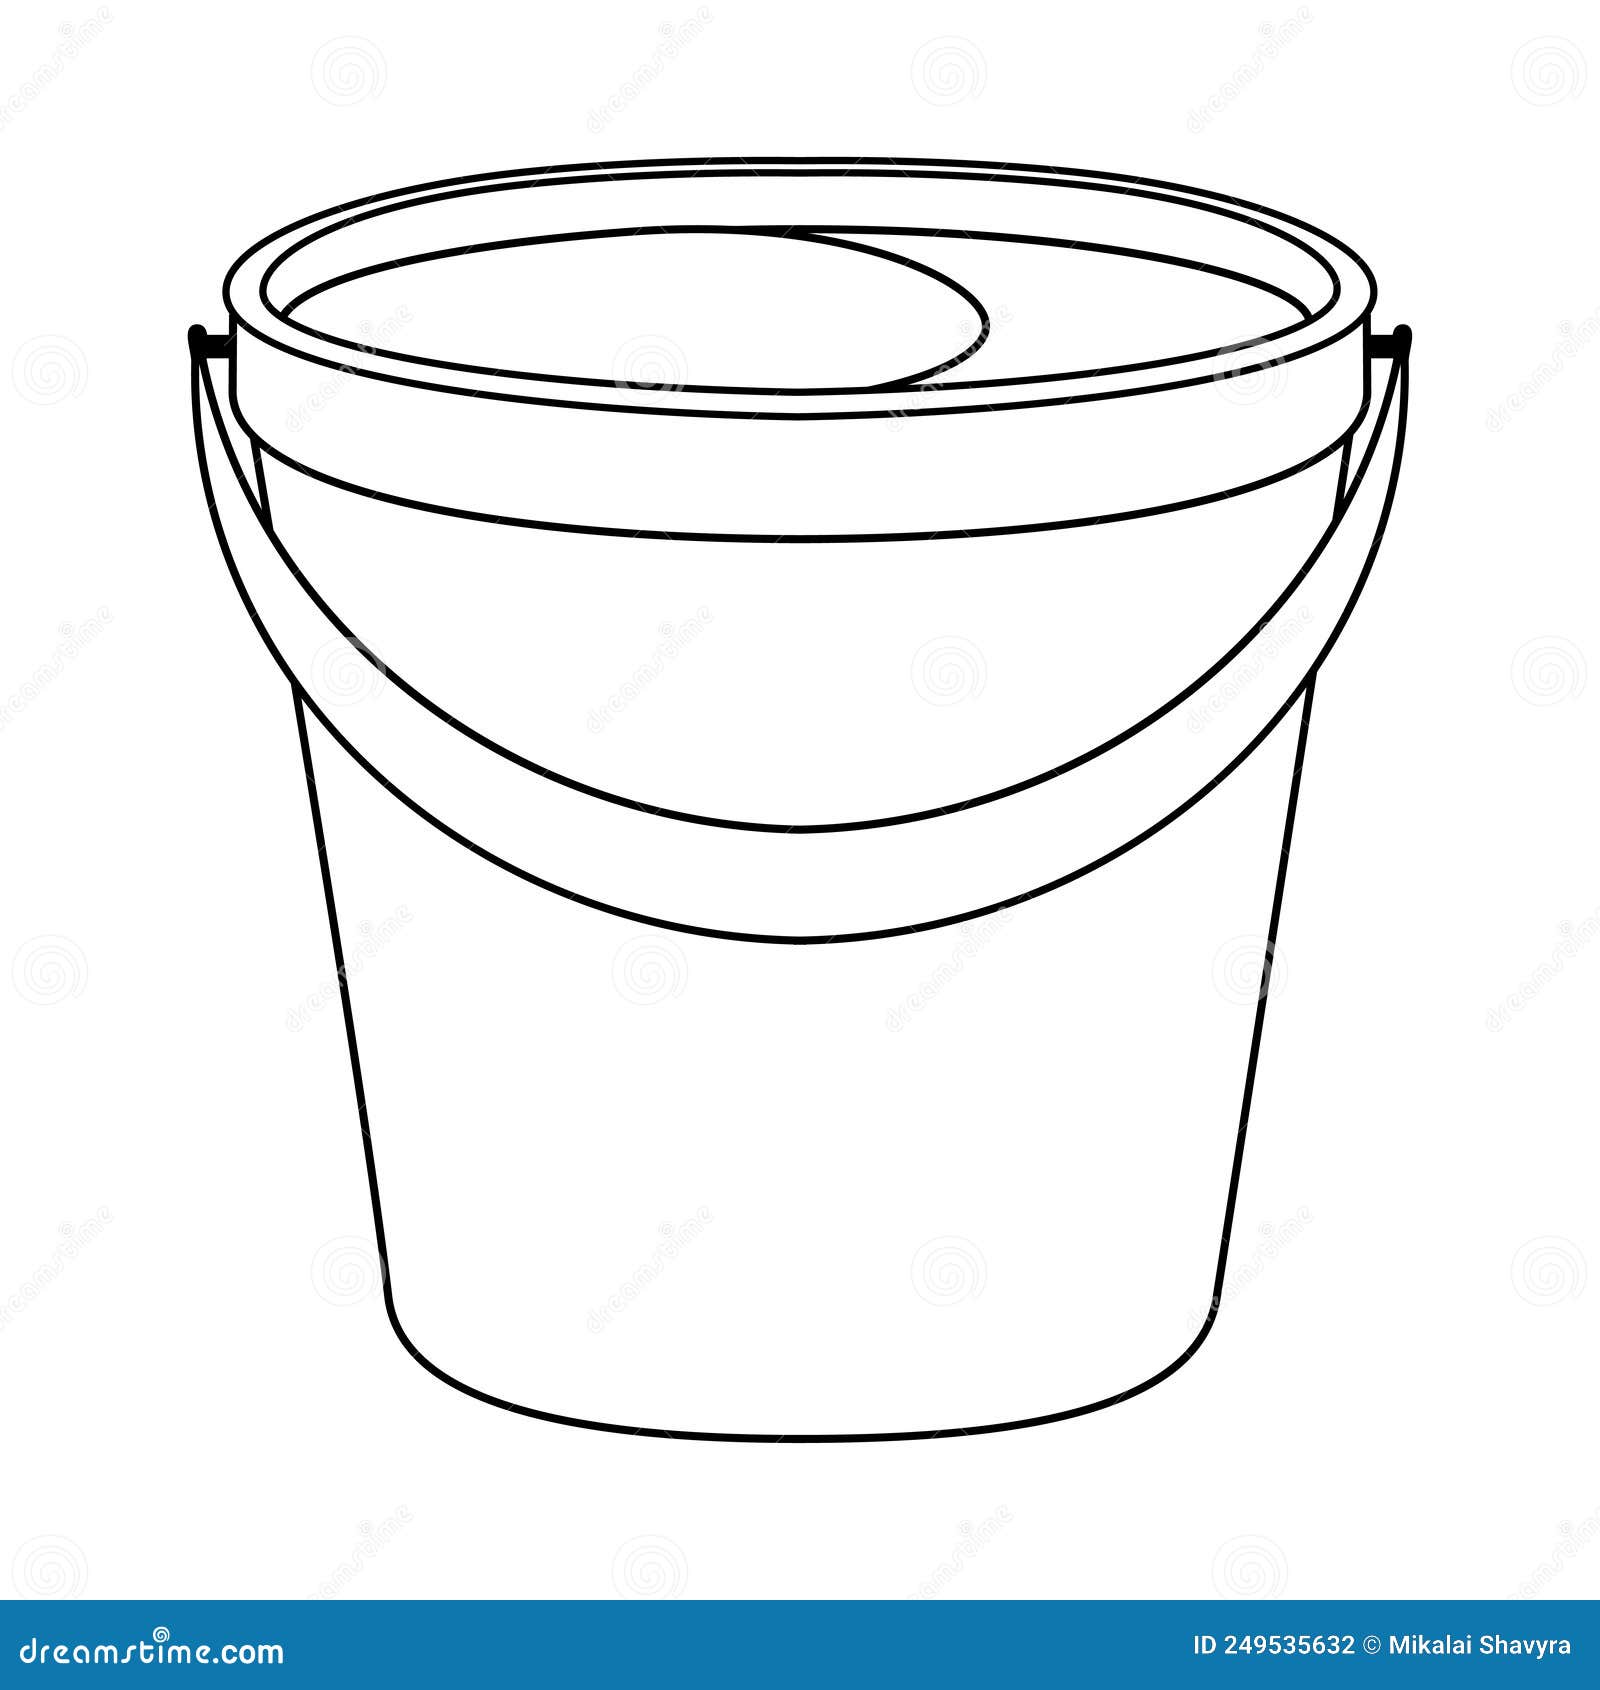 Coloring page with colorless cartoon bucket of water template of coloring book with plastic or metallic bucket stock vector